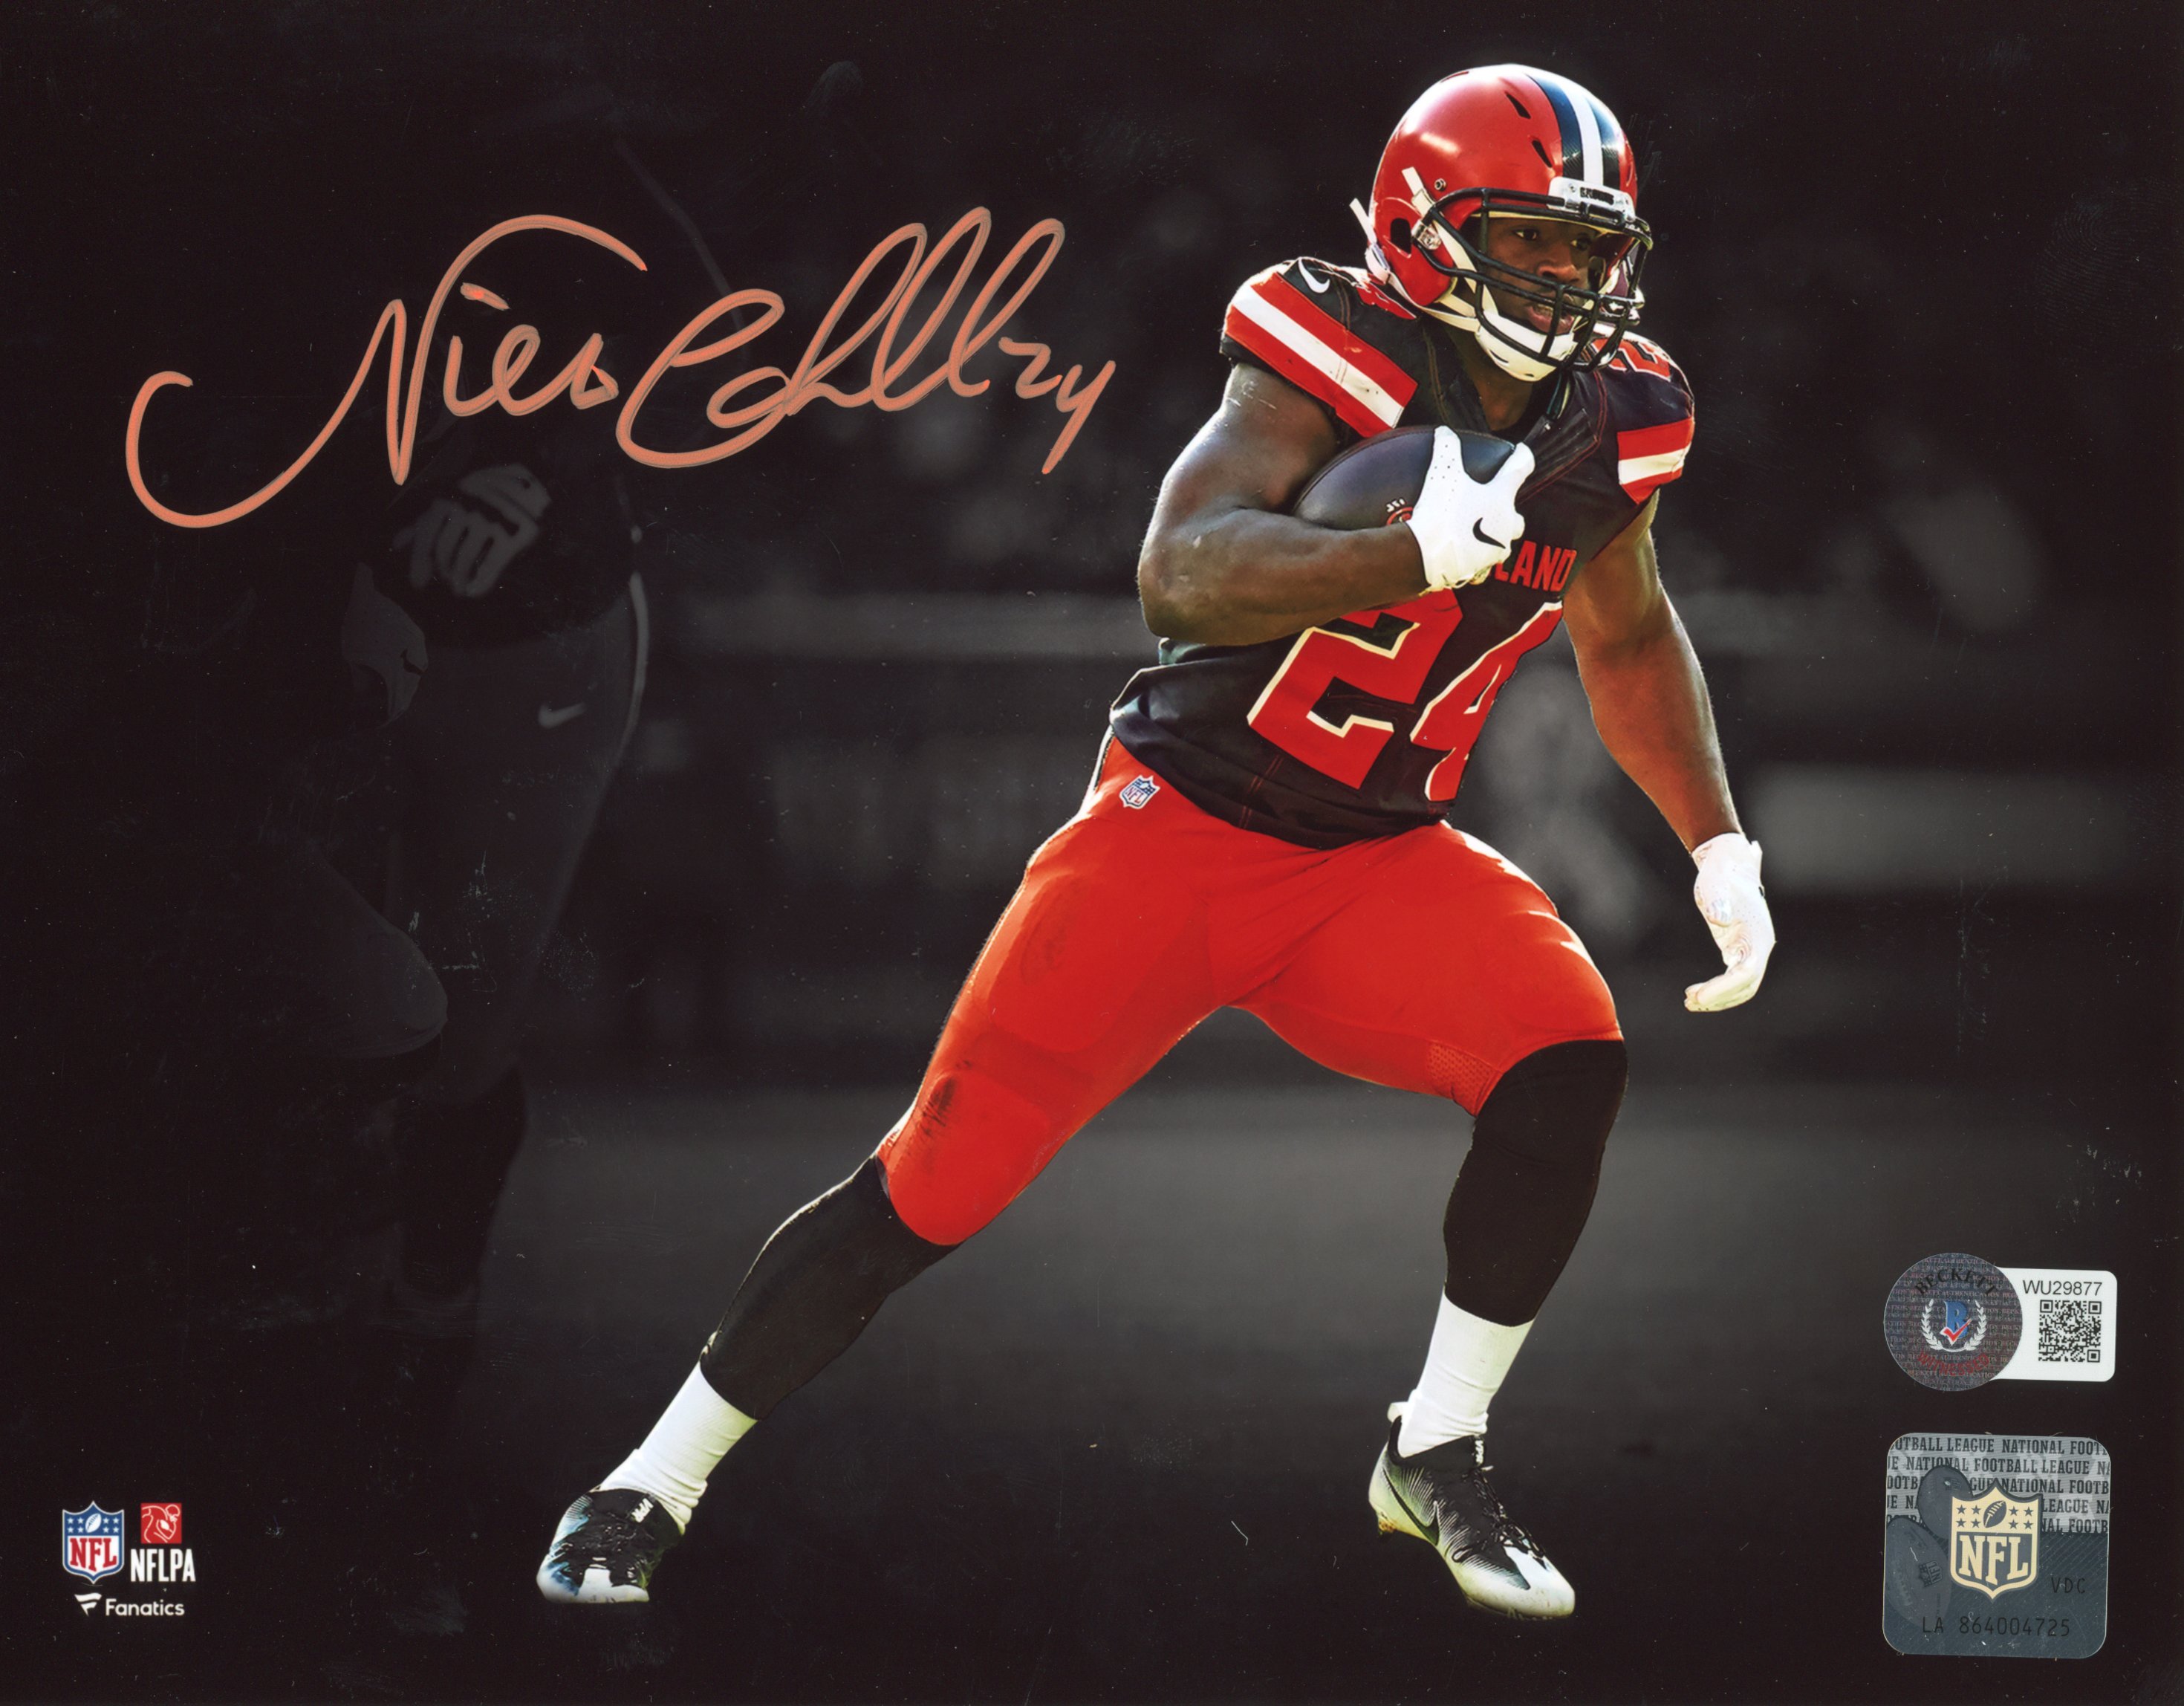 Nick Chubb Autographed/Signed Cleveland Browns 8x10 Photo Beckett